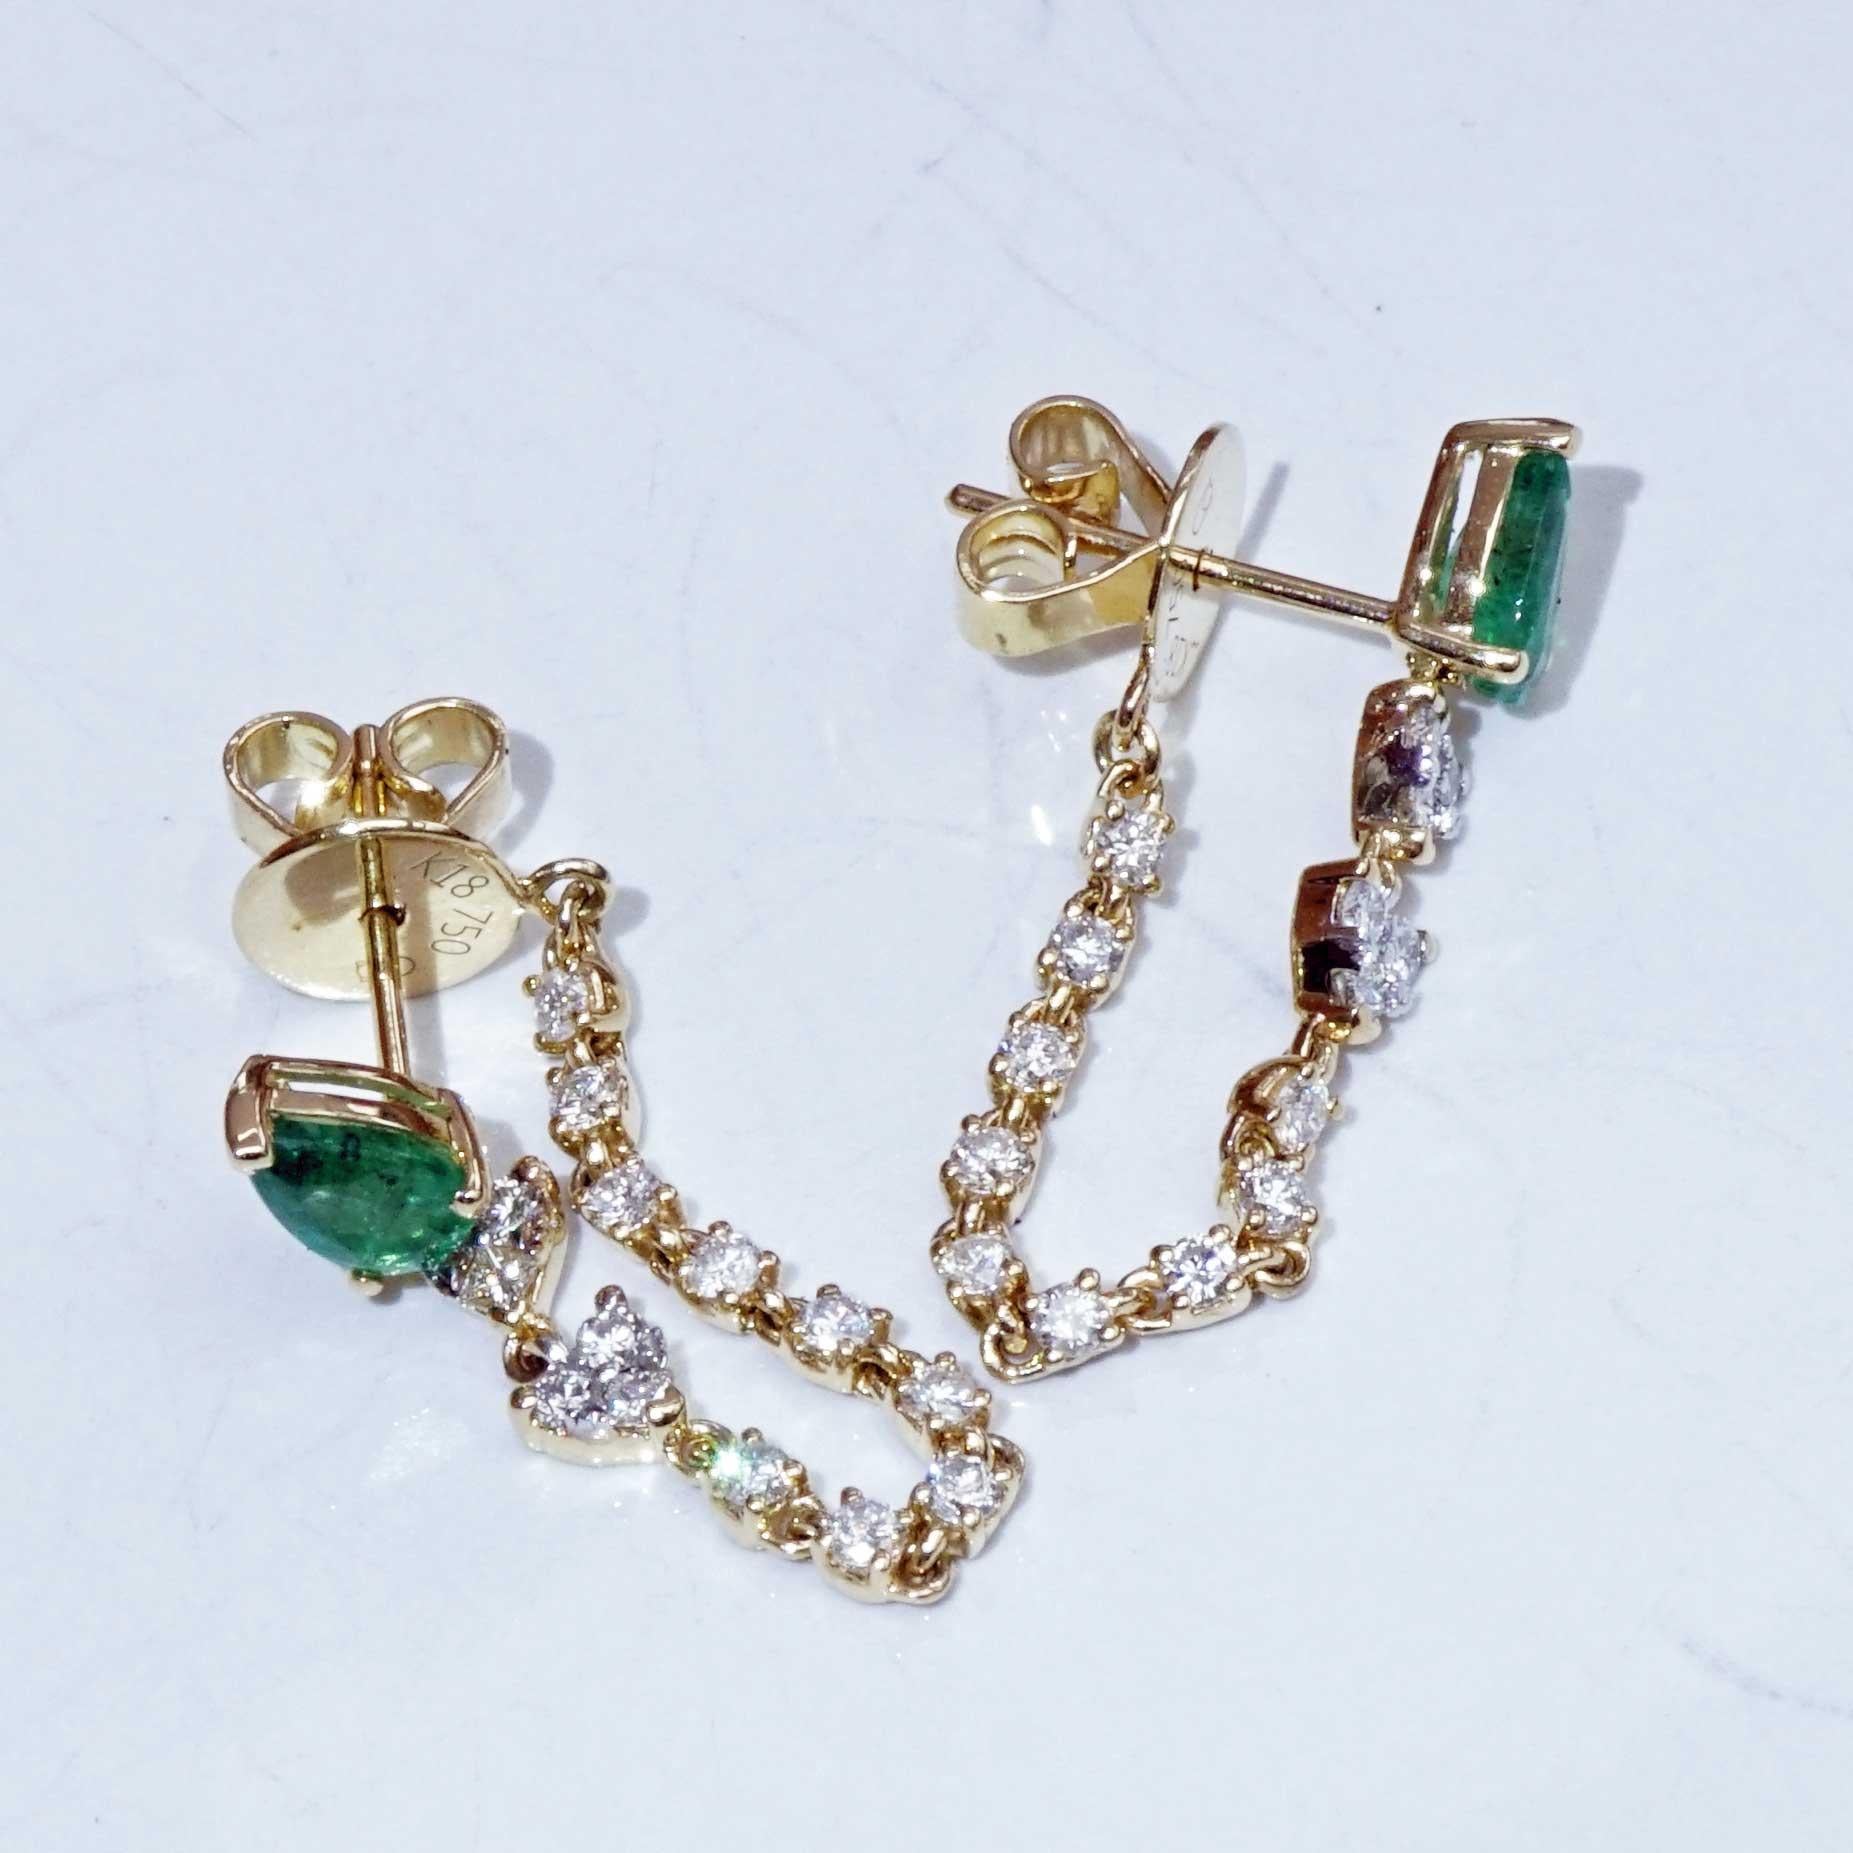 Brilliant Cut Emerald Brilliant Earring Studs Chain Style very trendy 0.70 0.60ct Length 28 mm For Sale